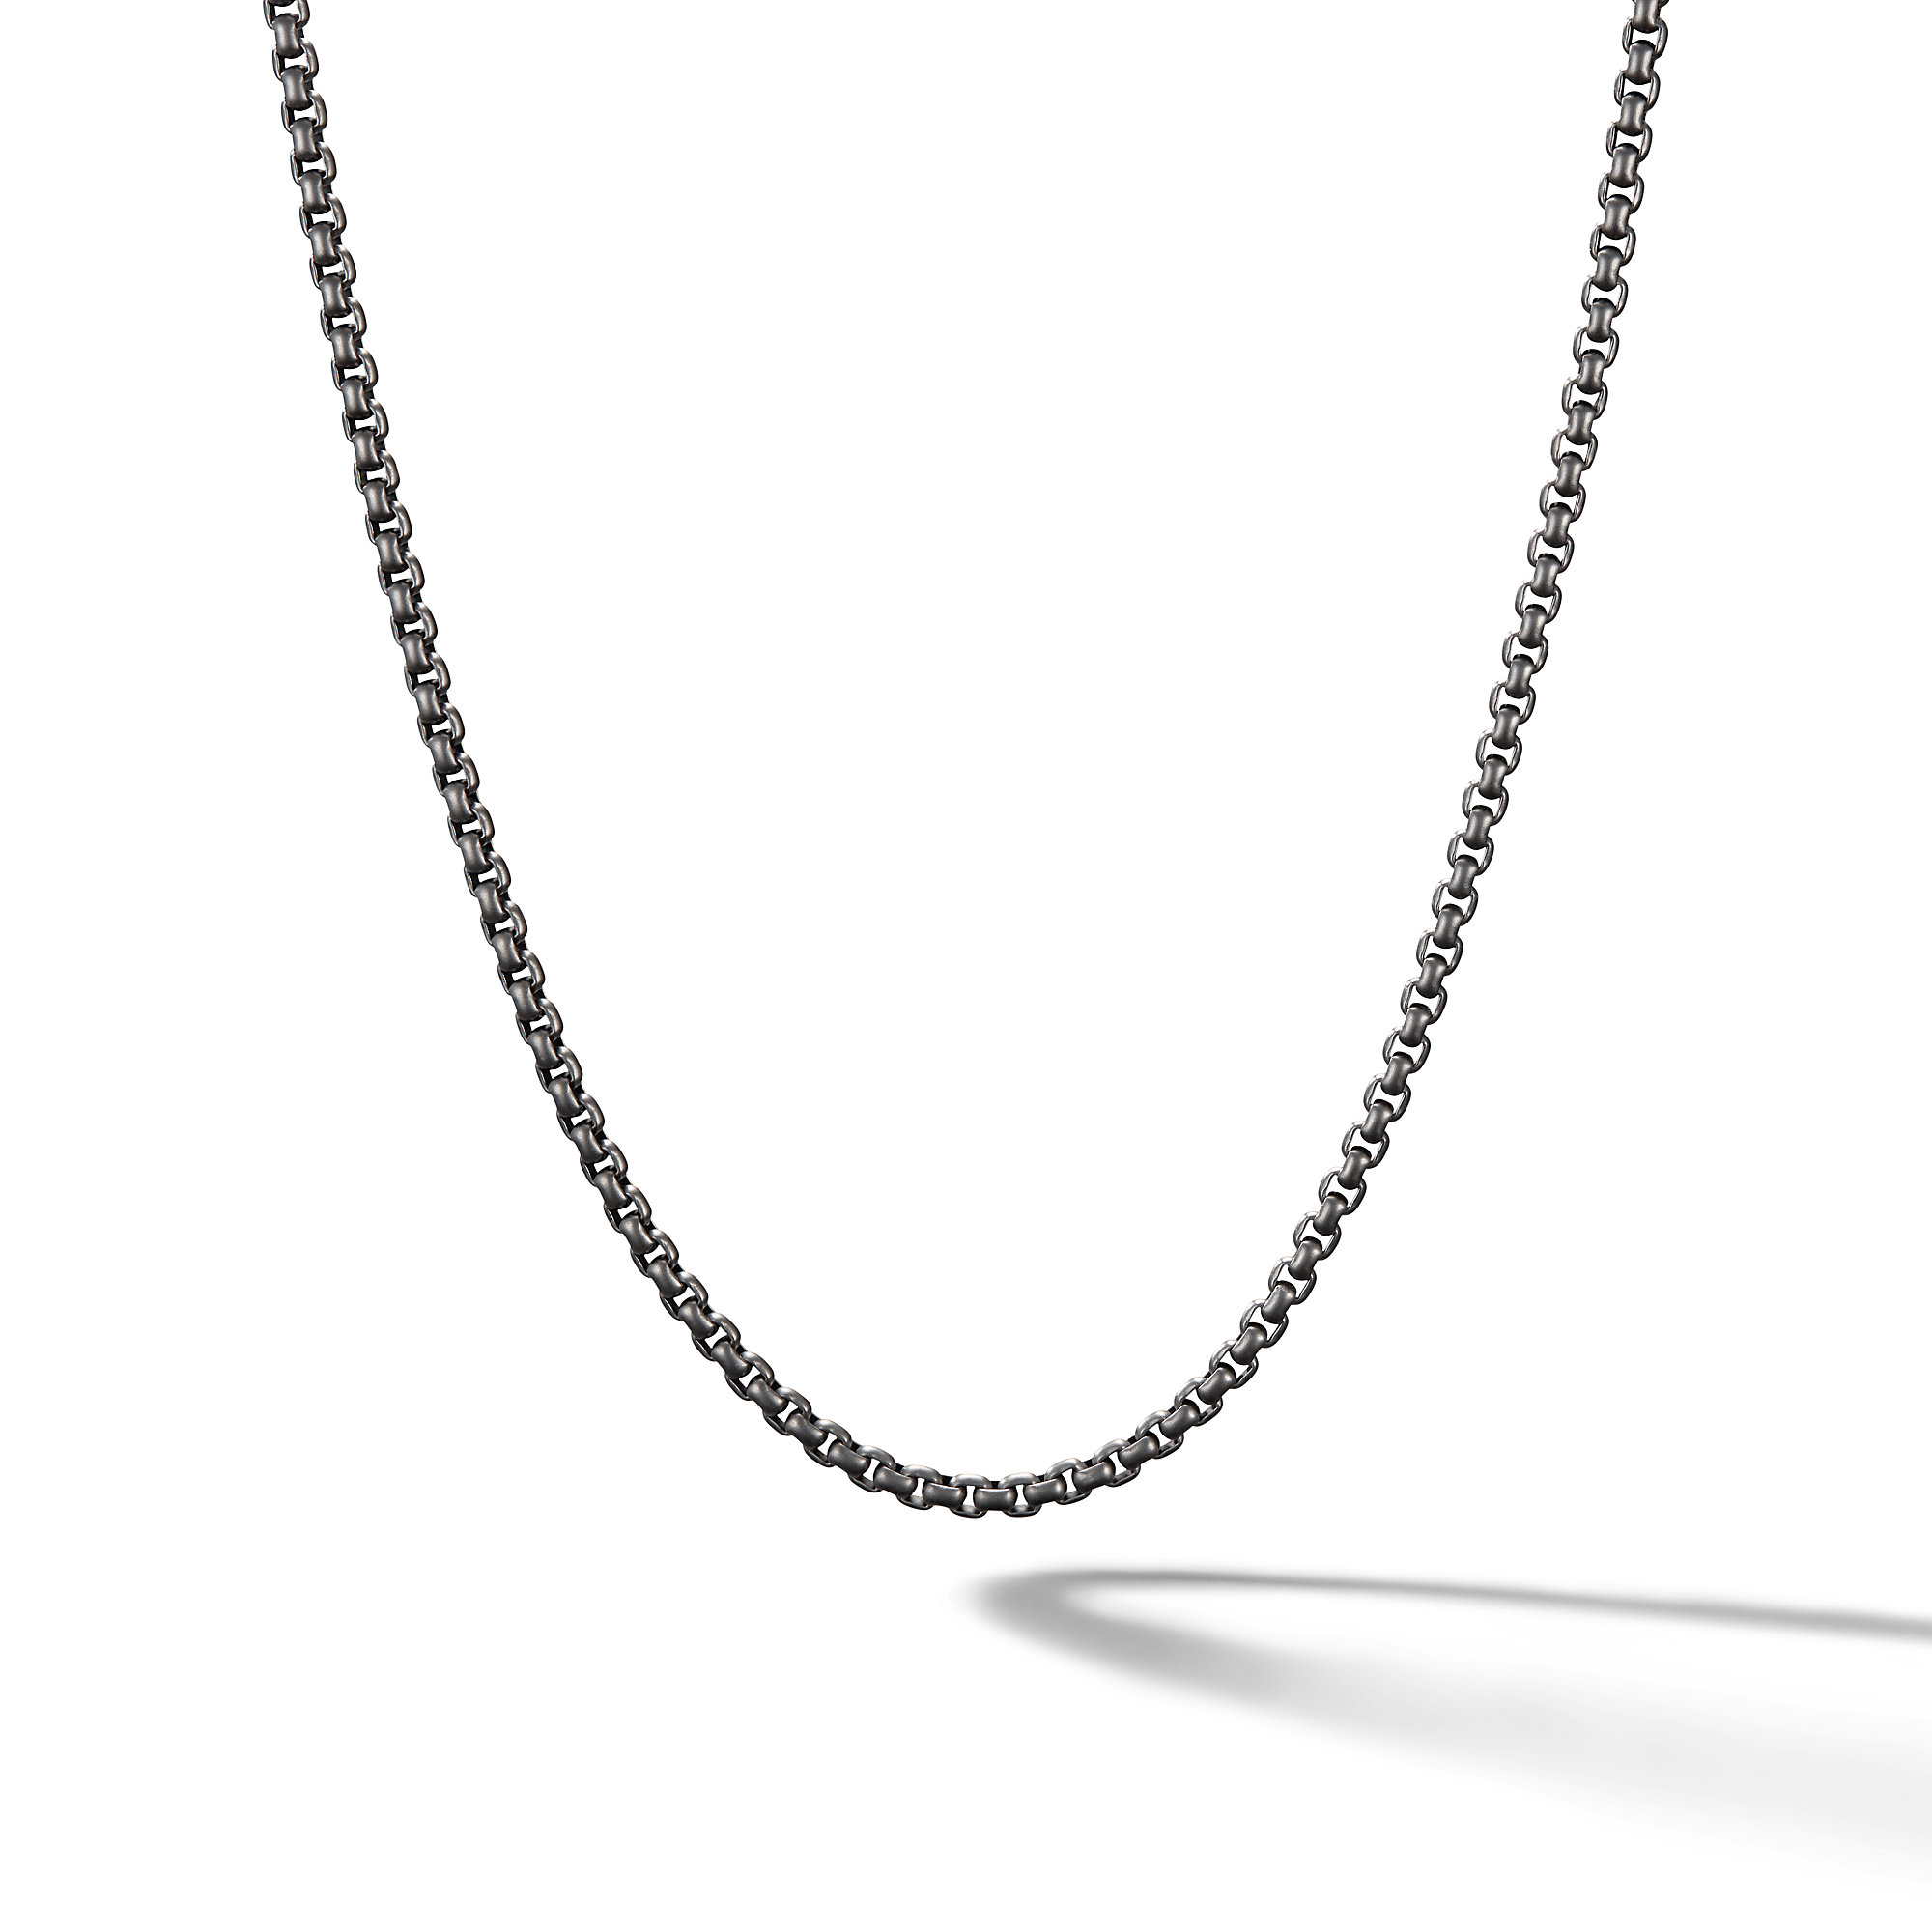 Box Chain Necklace in Stainless Steel, 2.7mm